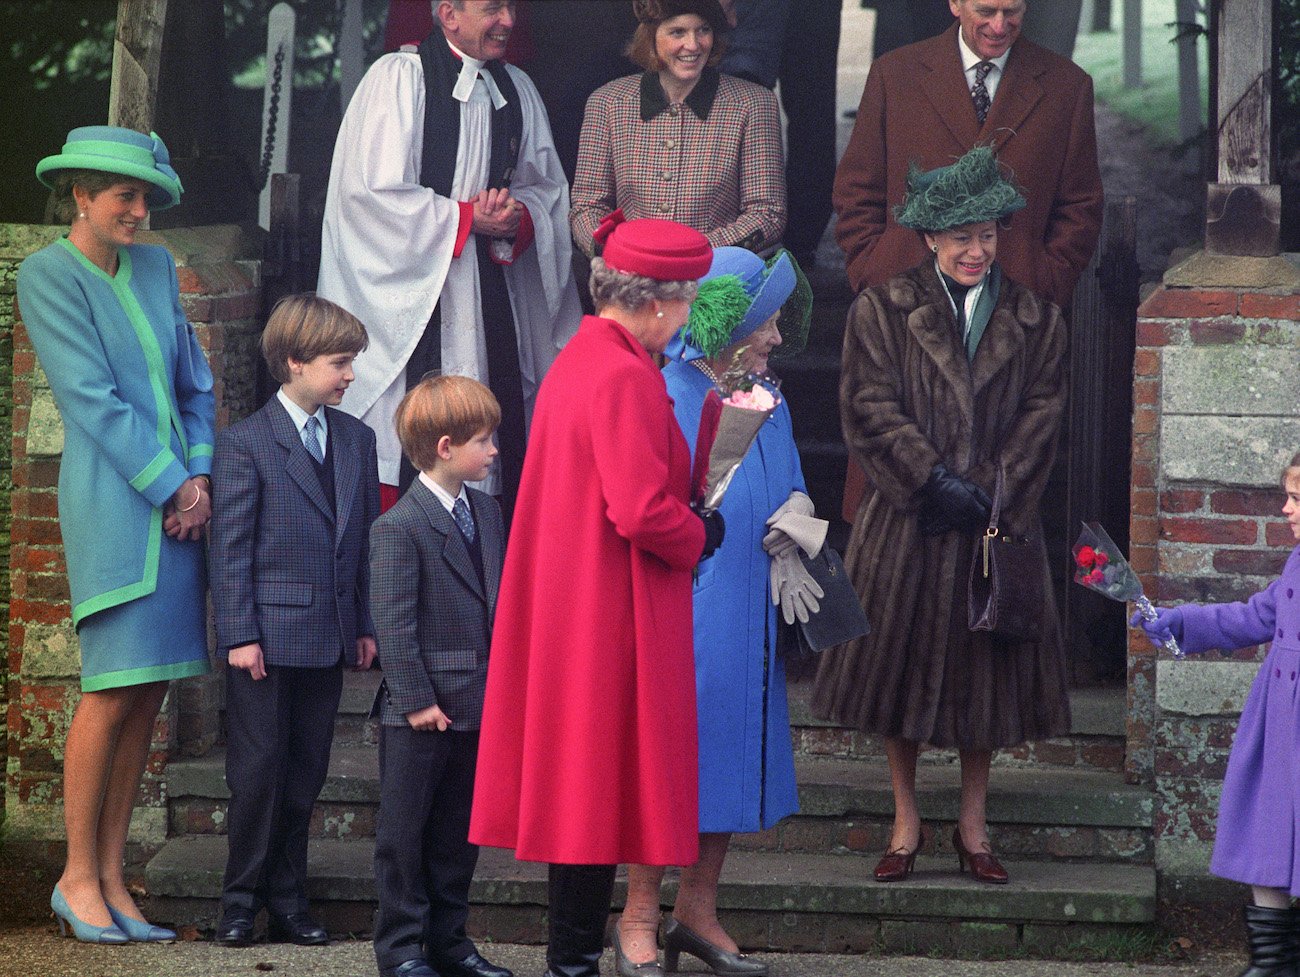 Princess Diana, Prince Harry, and Prince William stand near the Queen Mother as she accepts flowers